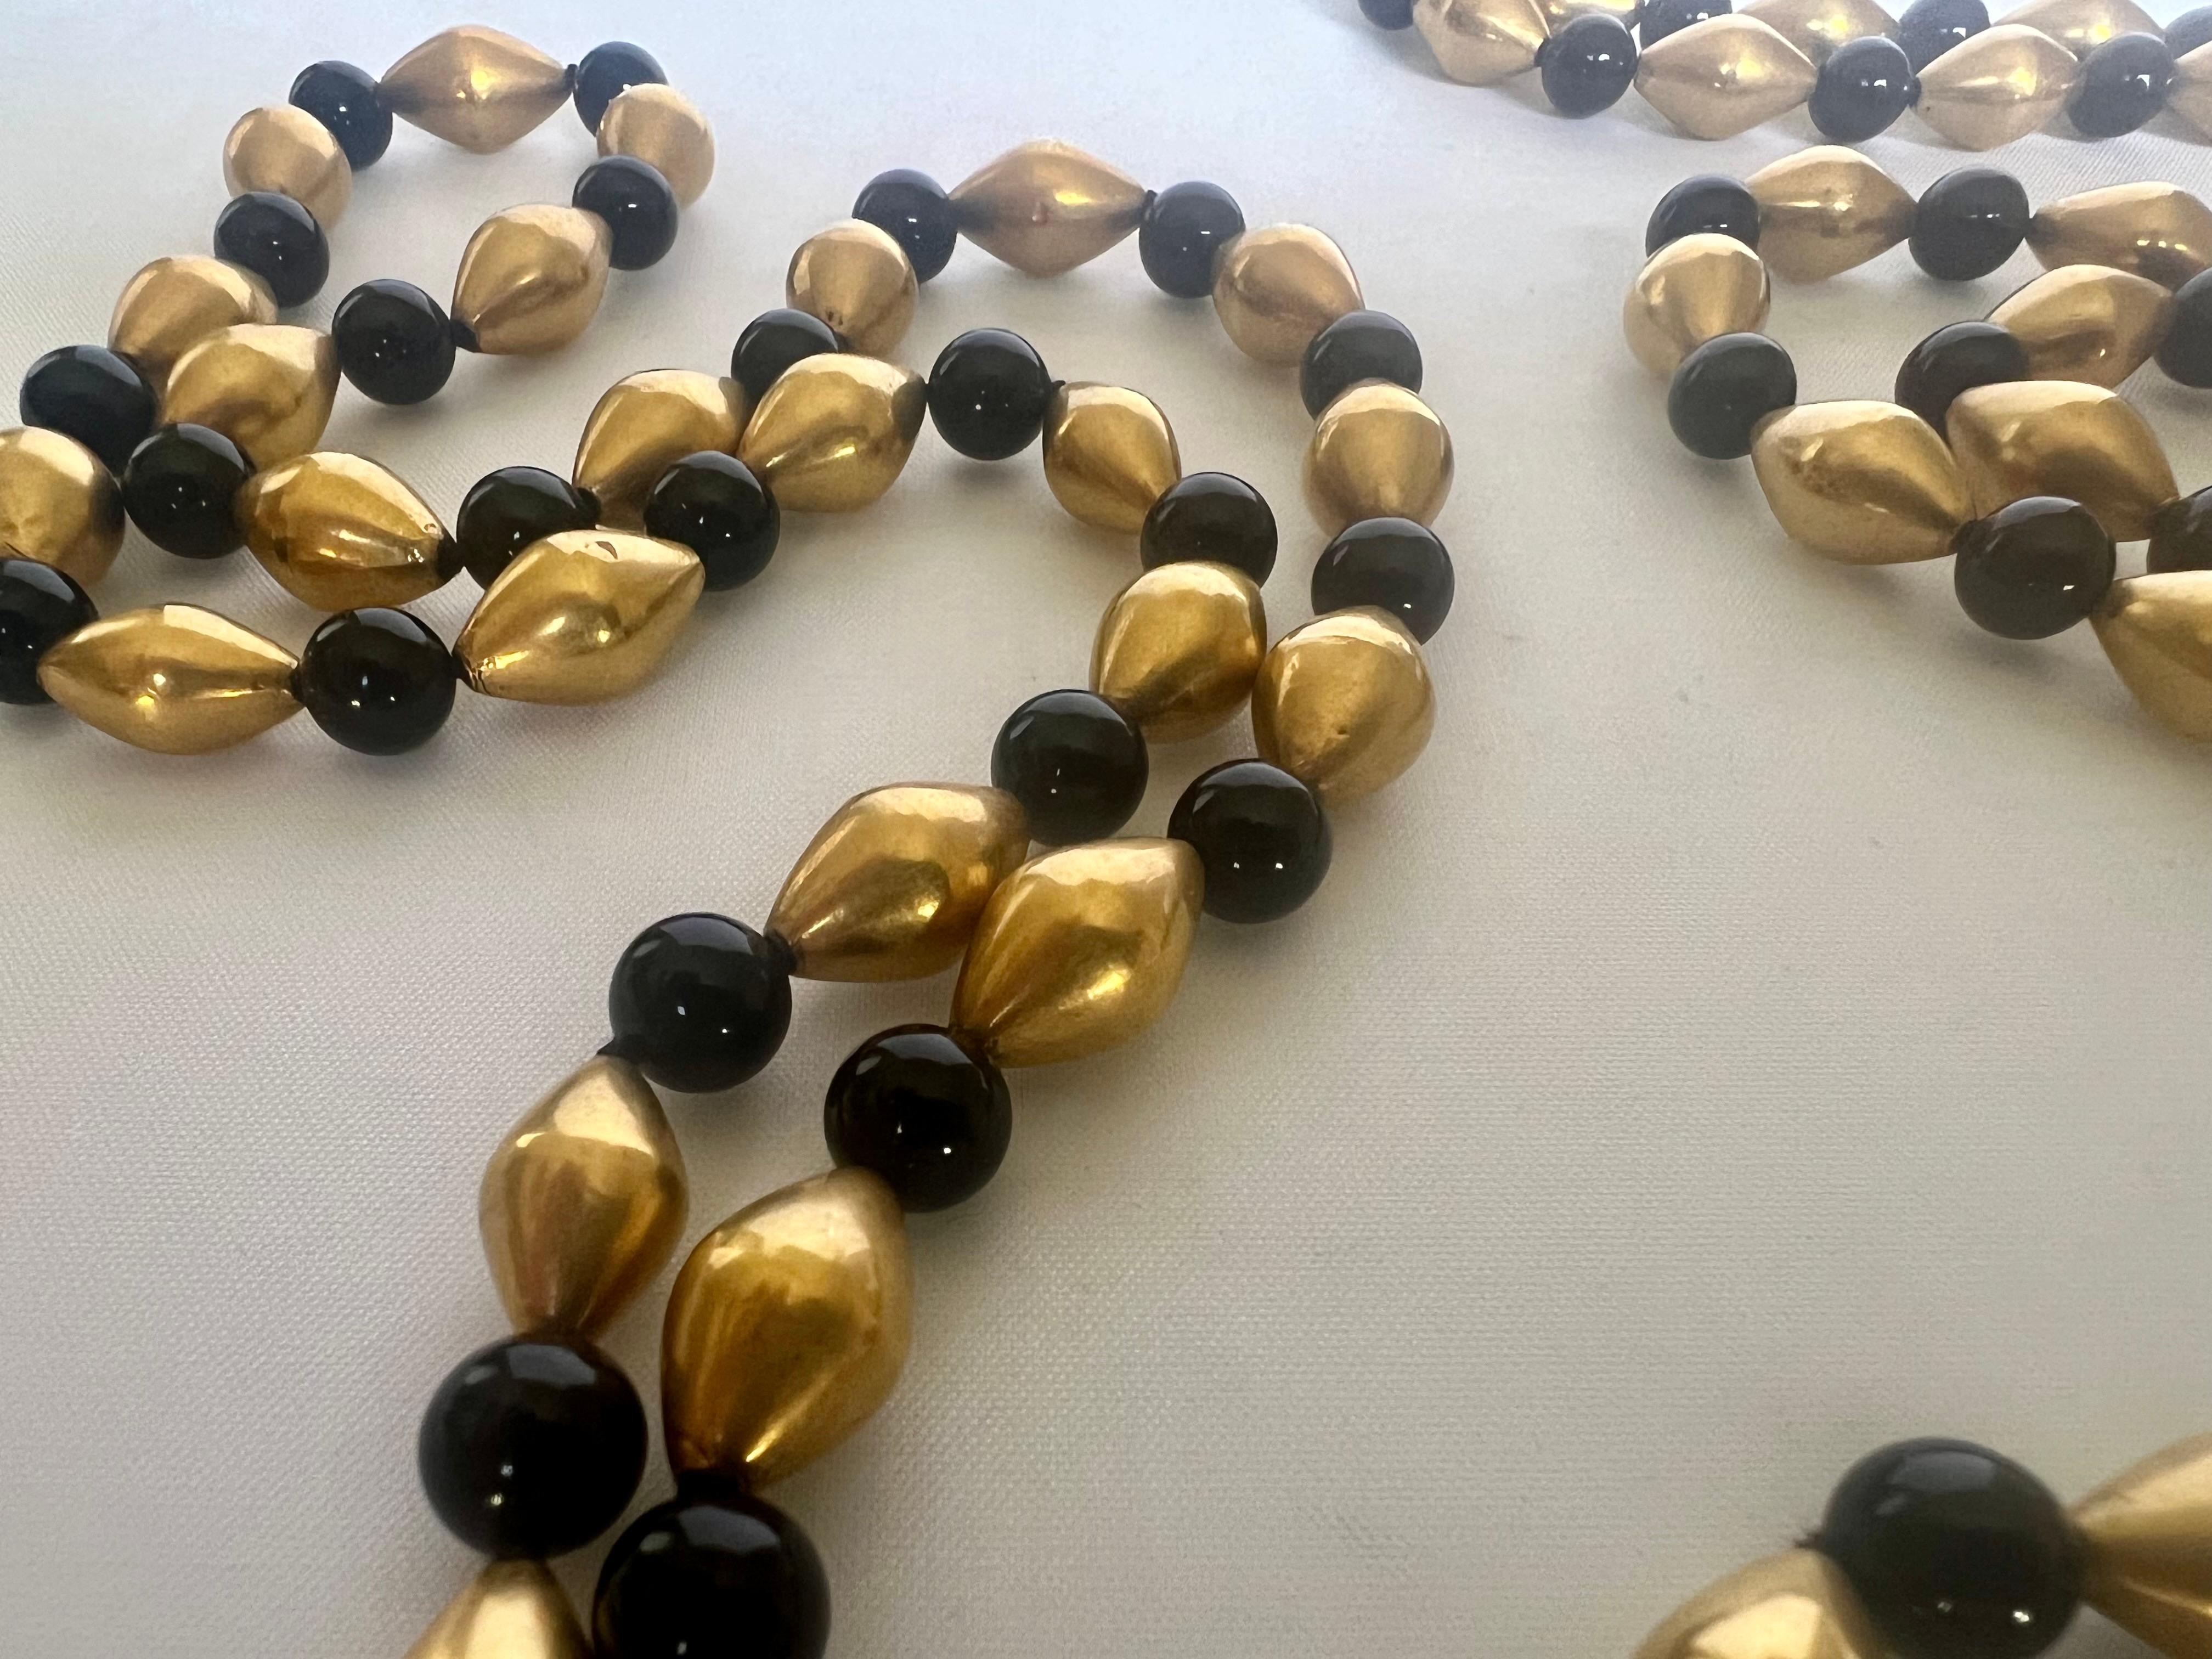 chanel beads for jewelry making